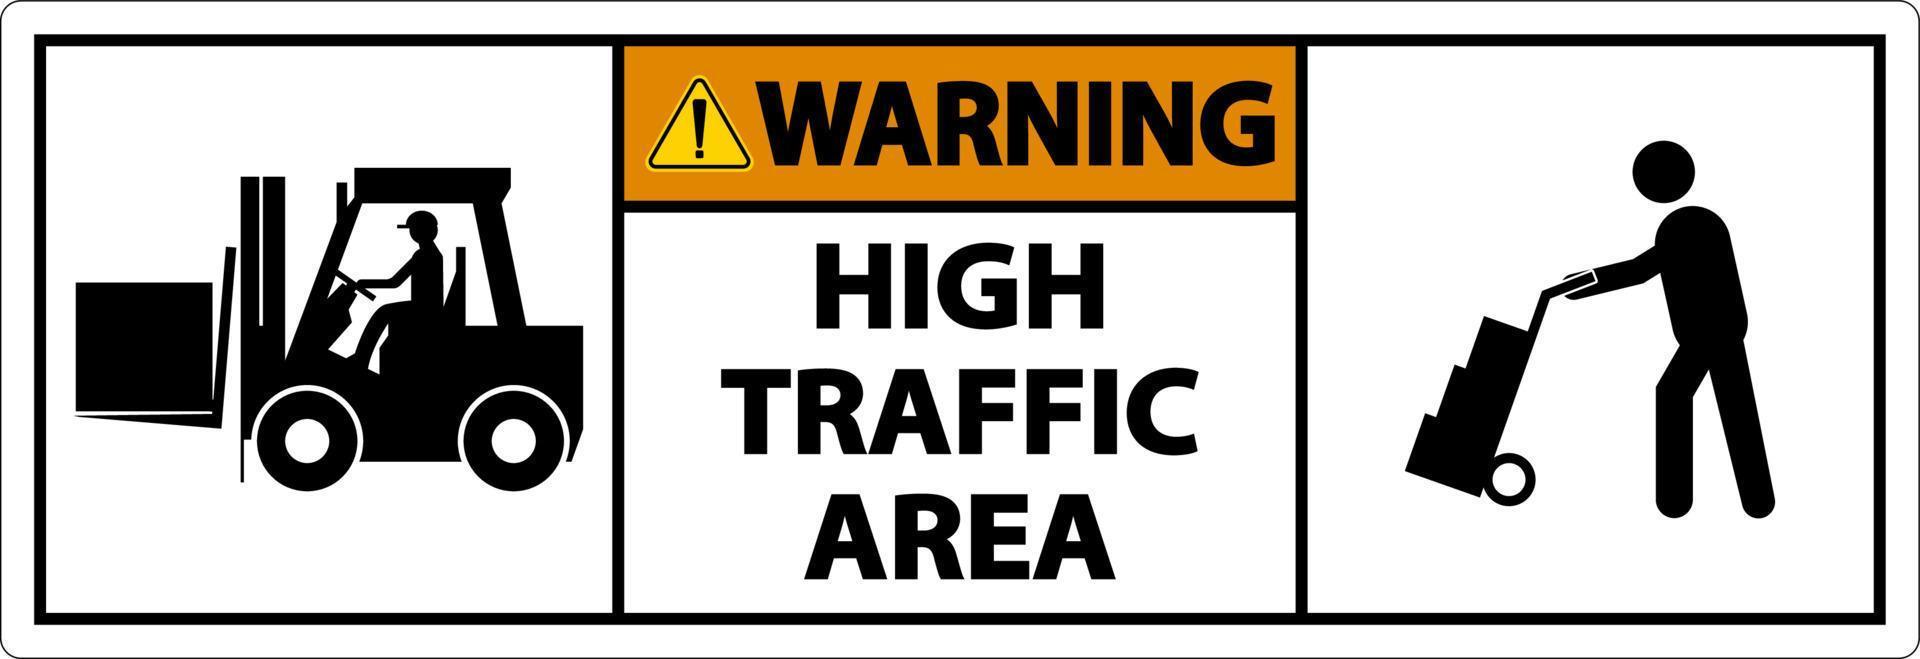 Warning Slow High Traffic Area Sign On White Background vector